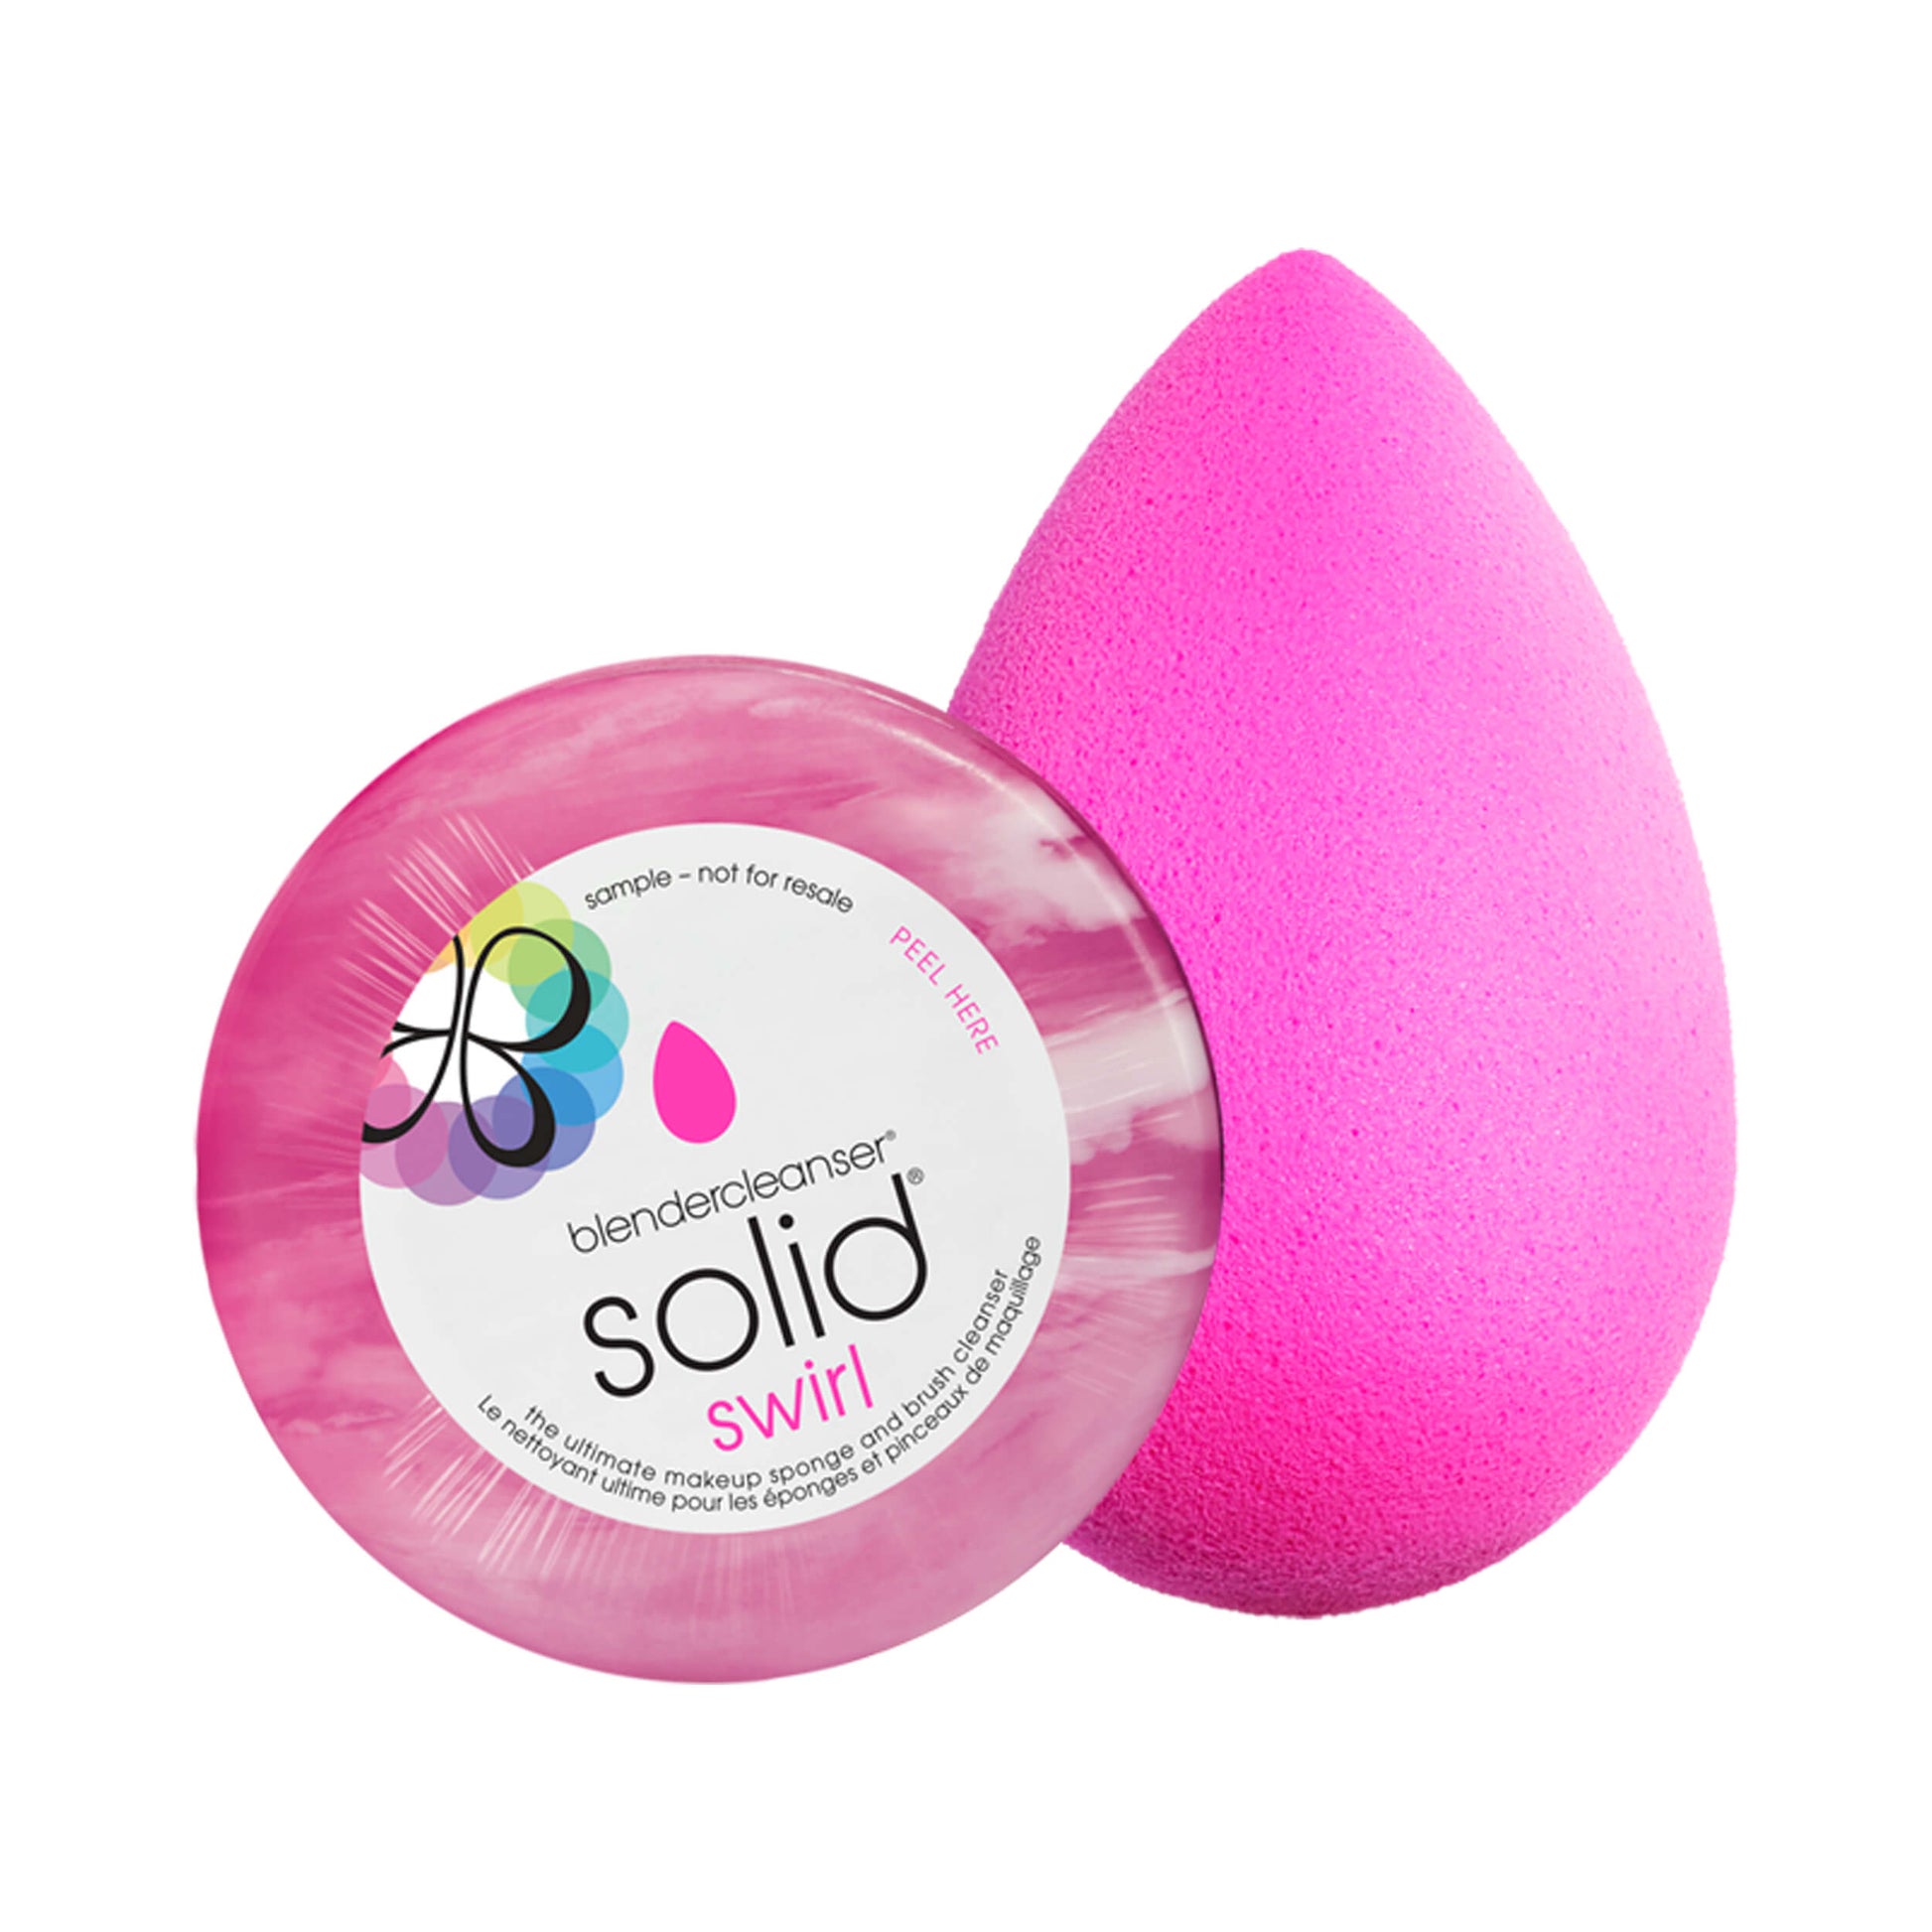 Beautyblender Sweet Surprise Limited Edition